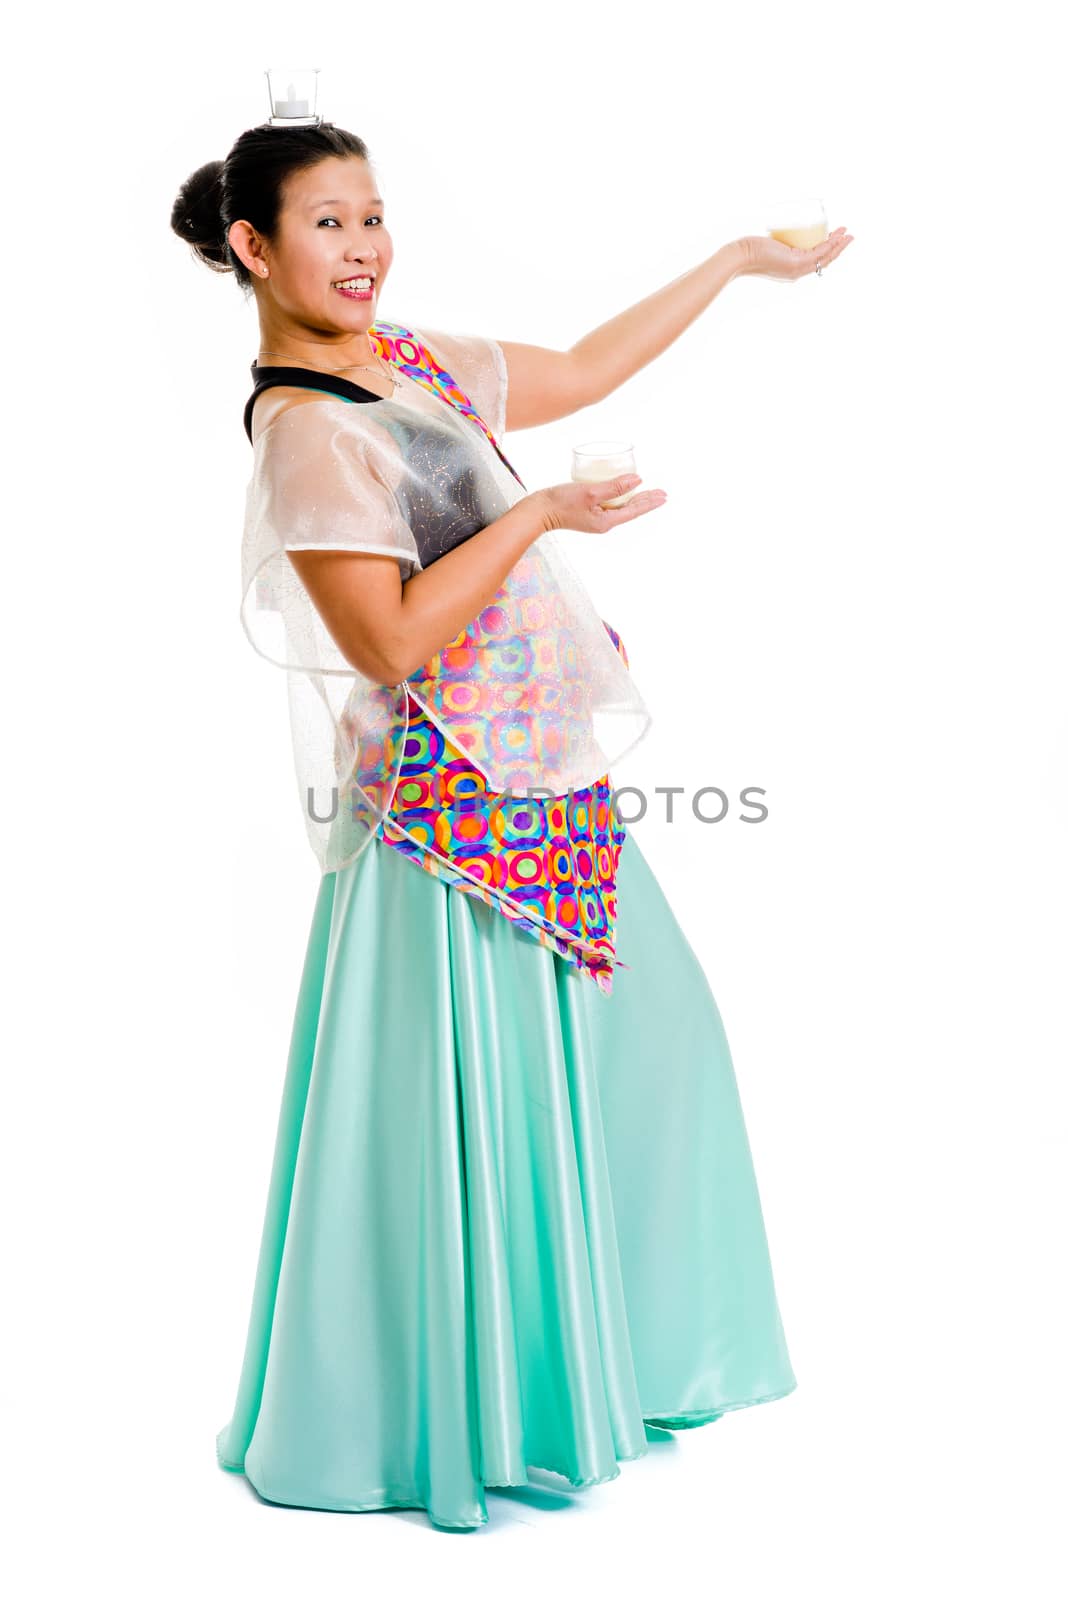 Filipina dressed up in traditional dress.